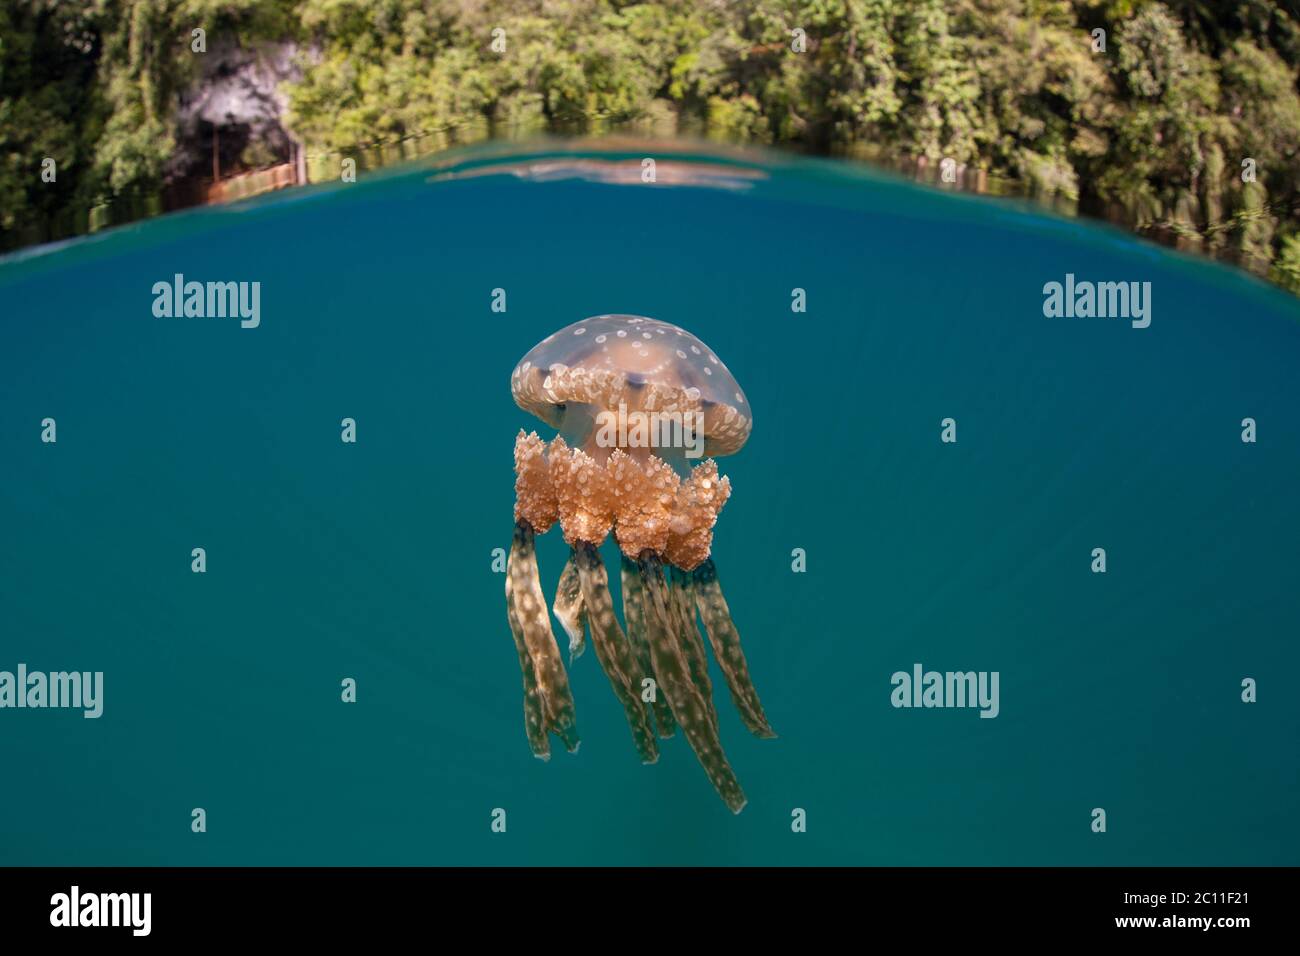 A jellyfish, Mastigias papua, swims near the surface of a calm lagoon in Palau. This remote, tropical country is famous for its Jellyfish Lake. Stock Photo